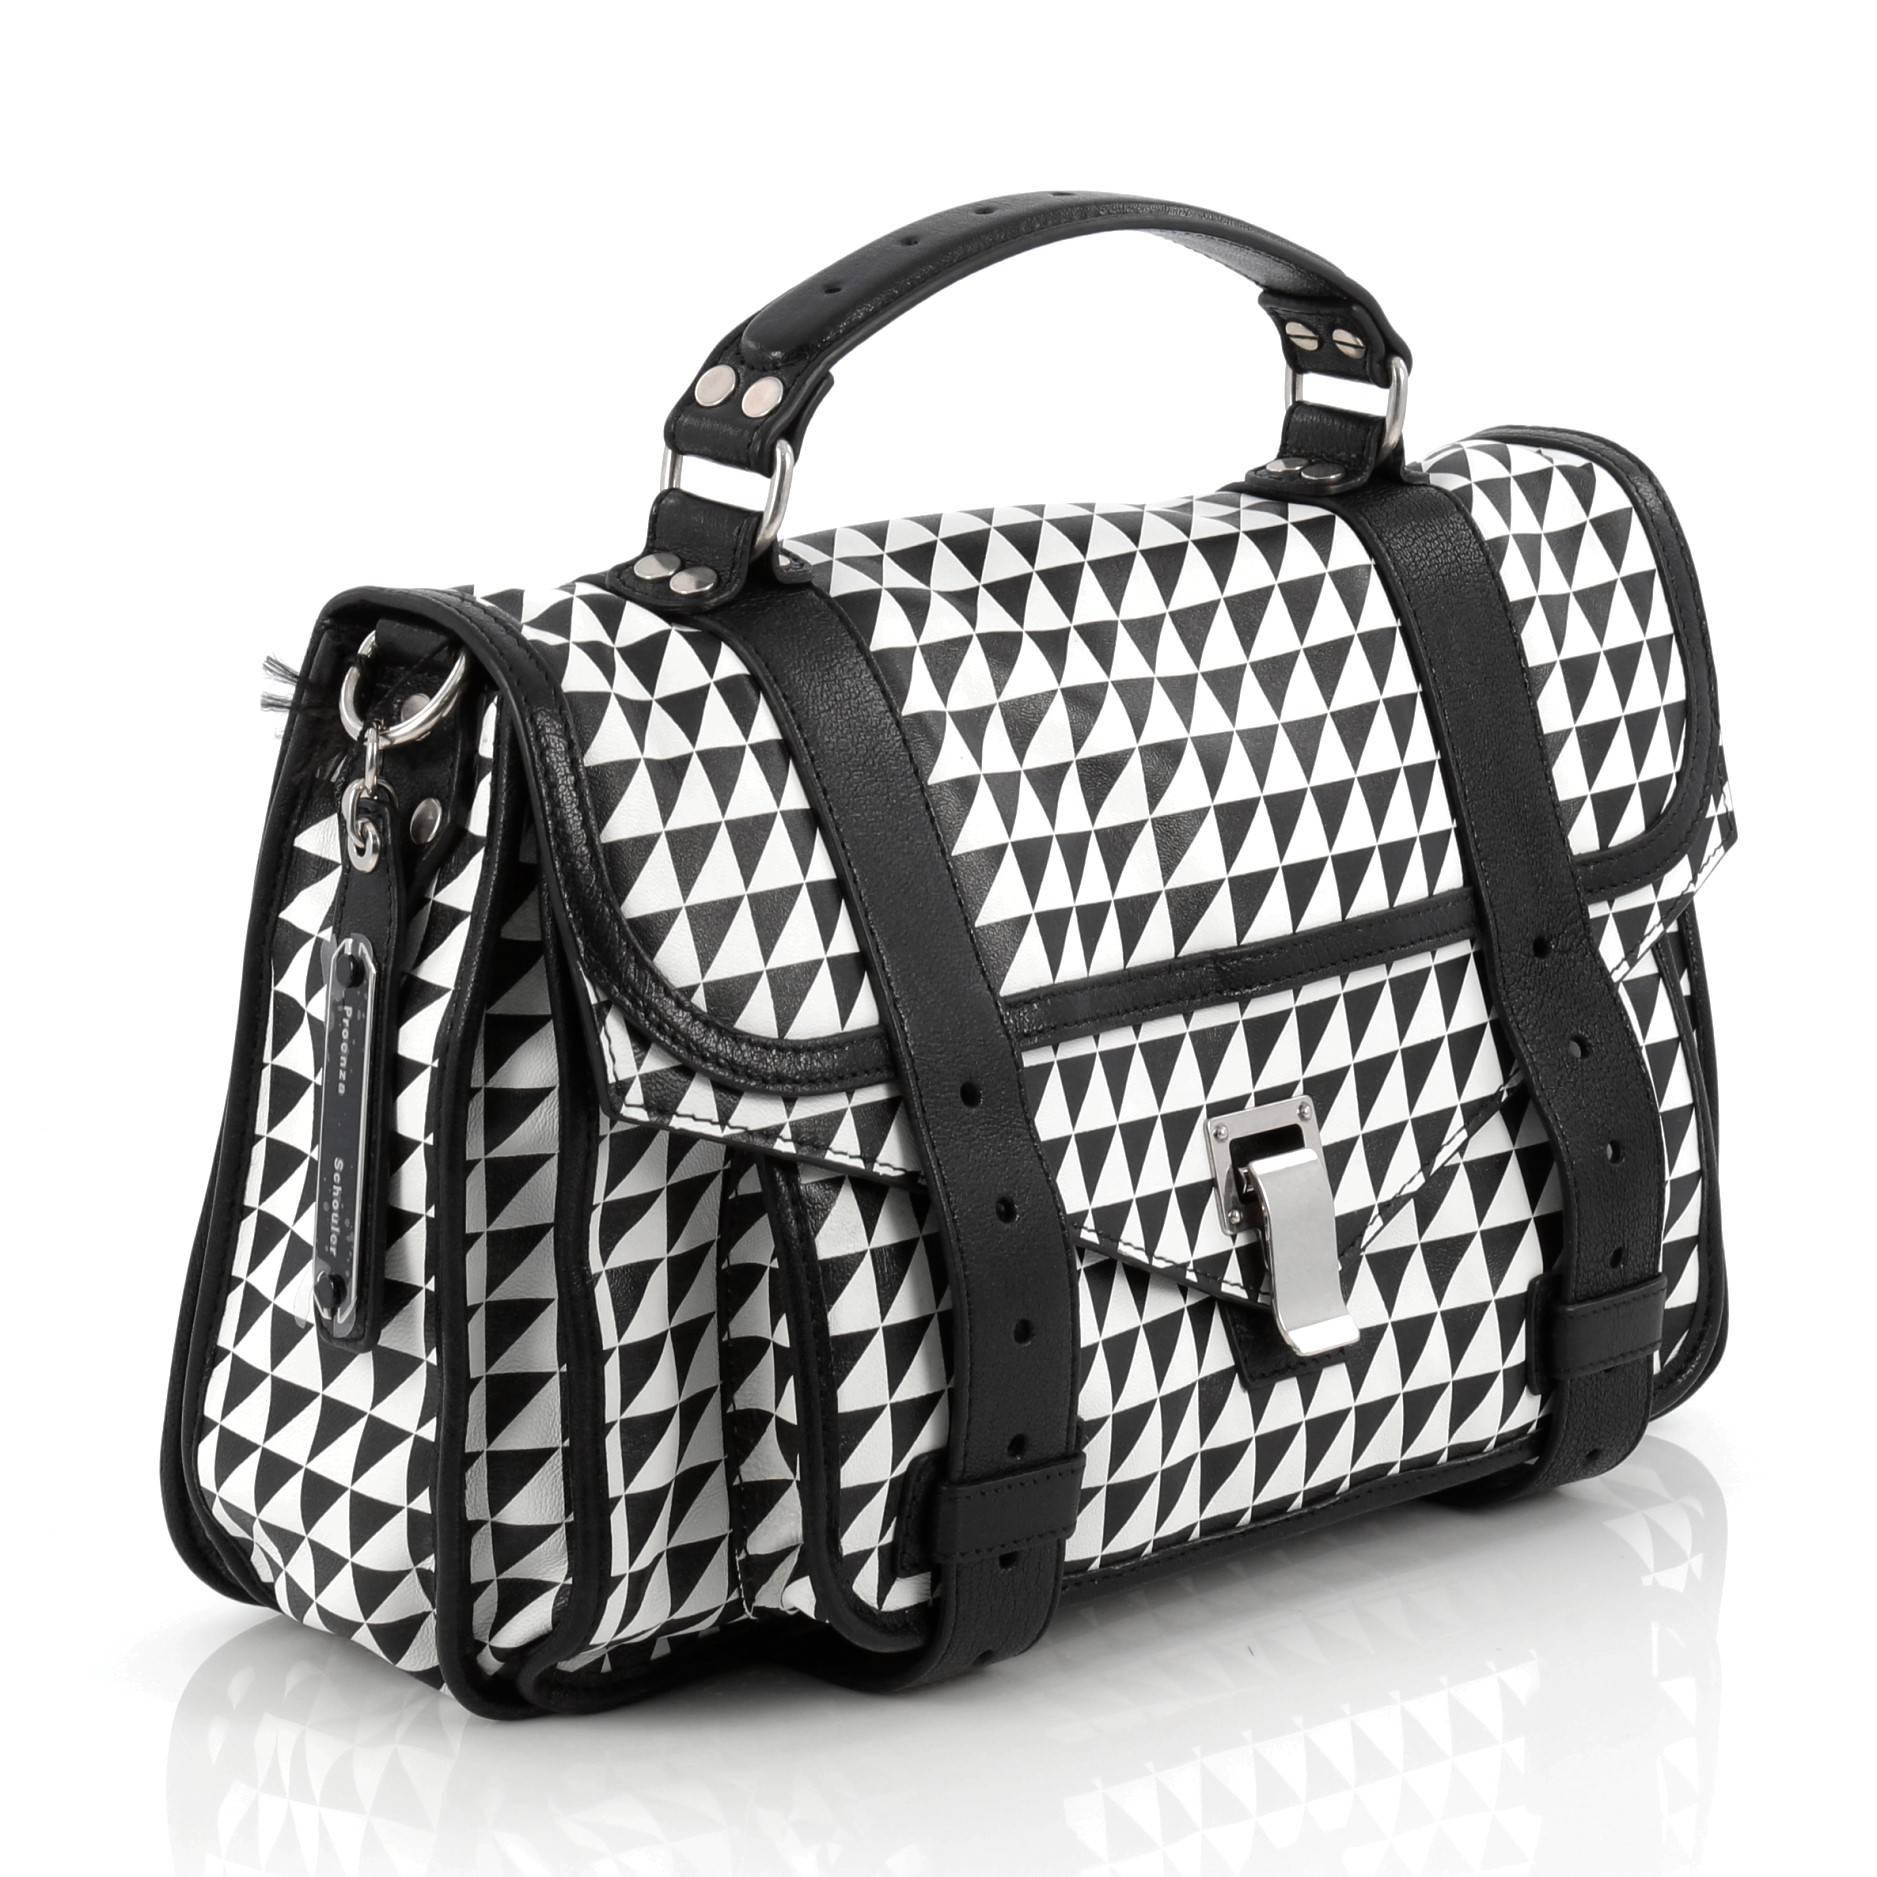 This authentic Proenza Schouler PS1 Satchel Printed Leather Medium is the ideal way to travel with style and functionality. Constructed from black and white leather with black leather trims, this popular satchel features an envelope-style front flap